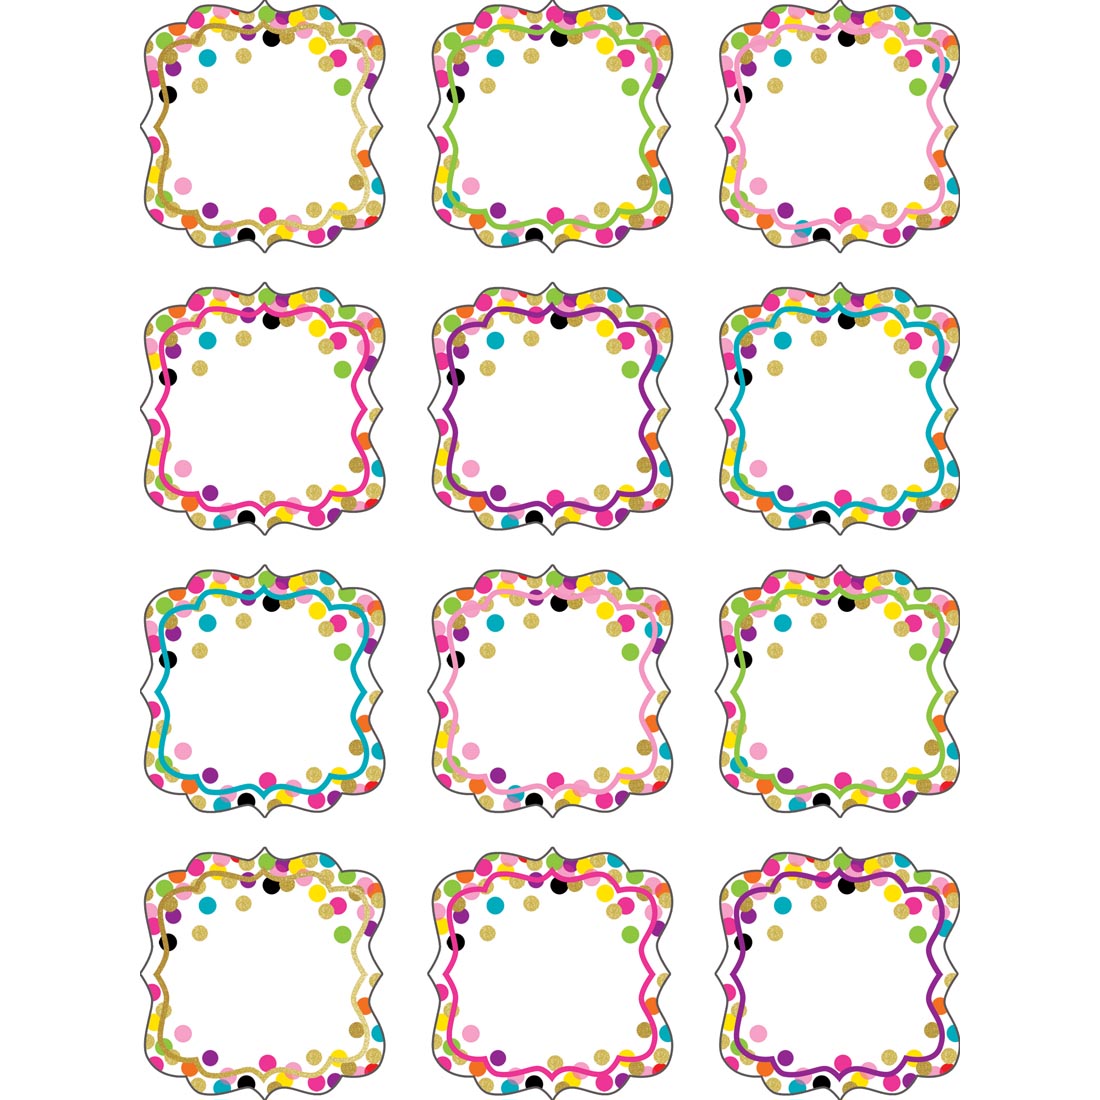 Mini Accents from the Confetti collection by Teacher Created Resources